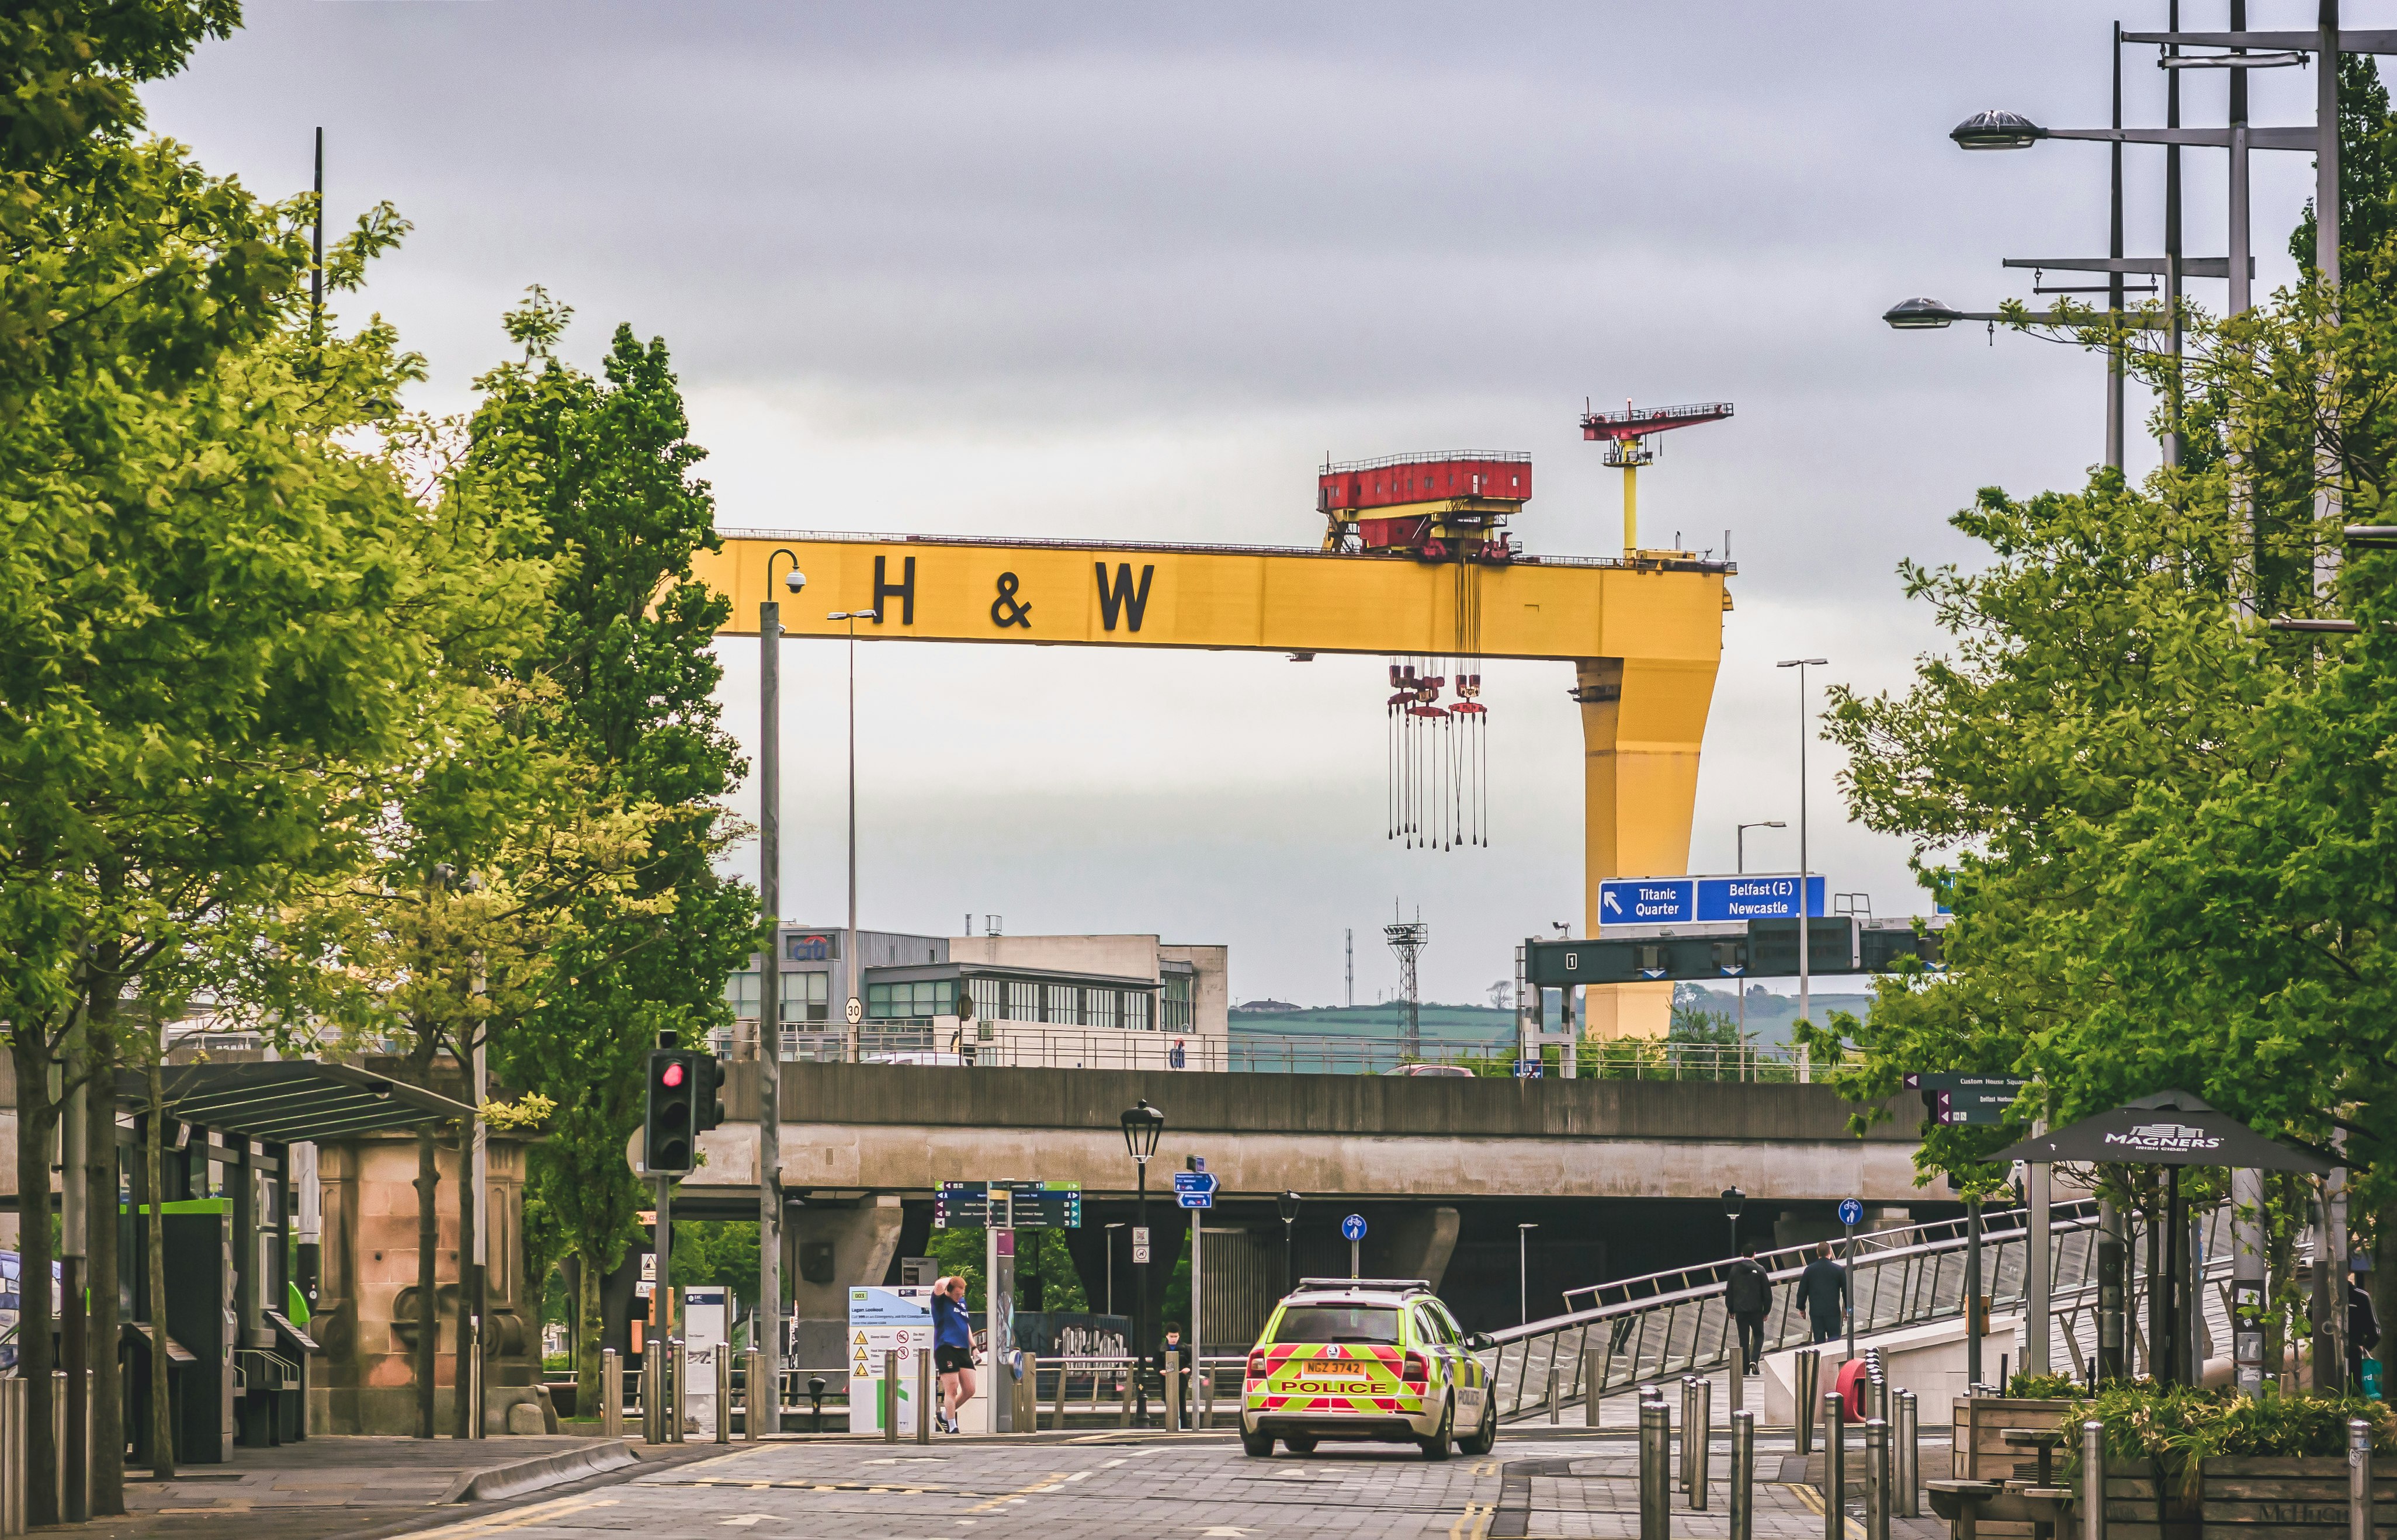 Police patrol the near-empty streets of Belfast during during lockdown due to the Covid-19 Pandemic whilst Samson, the ship-building crane, stands watch in the background (May, 2020).